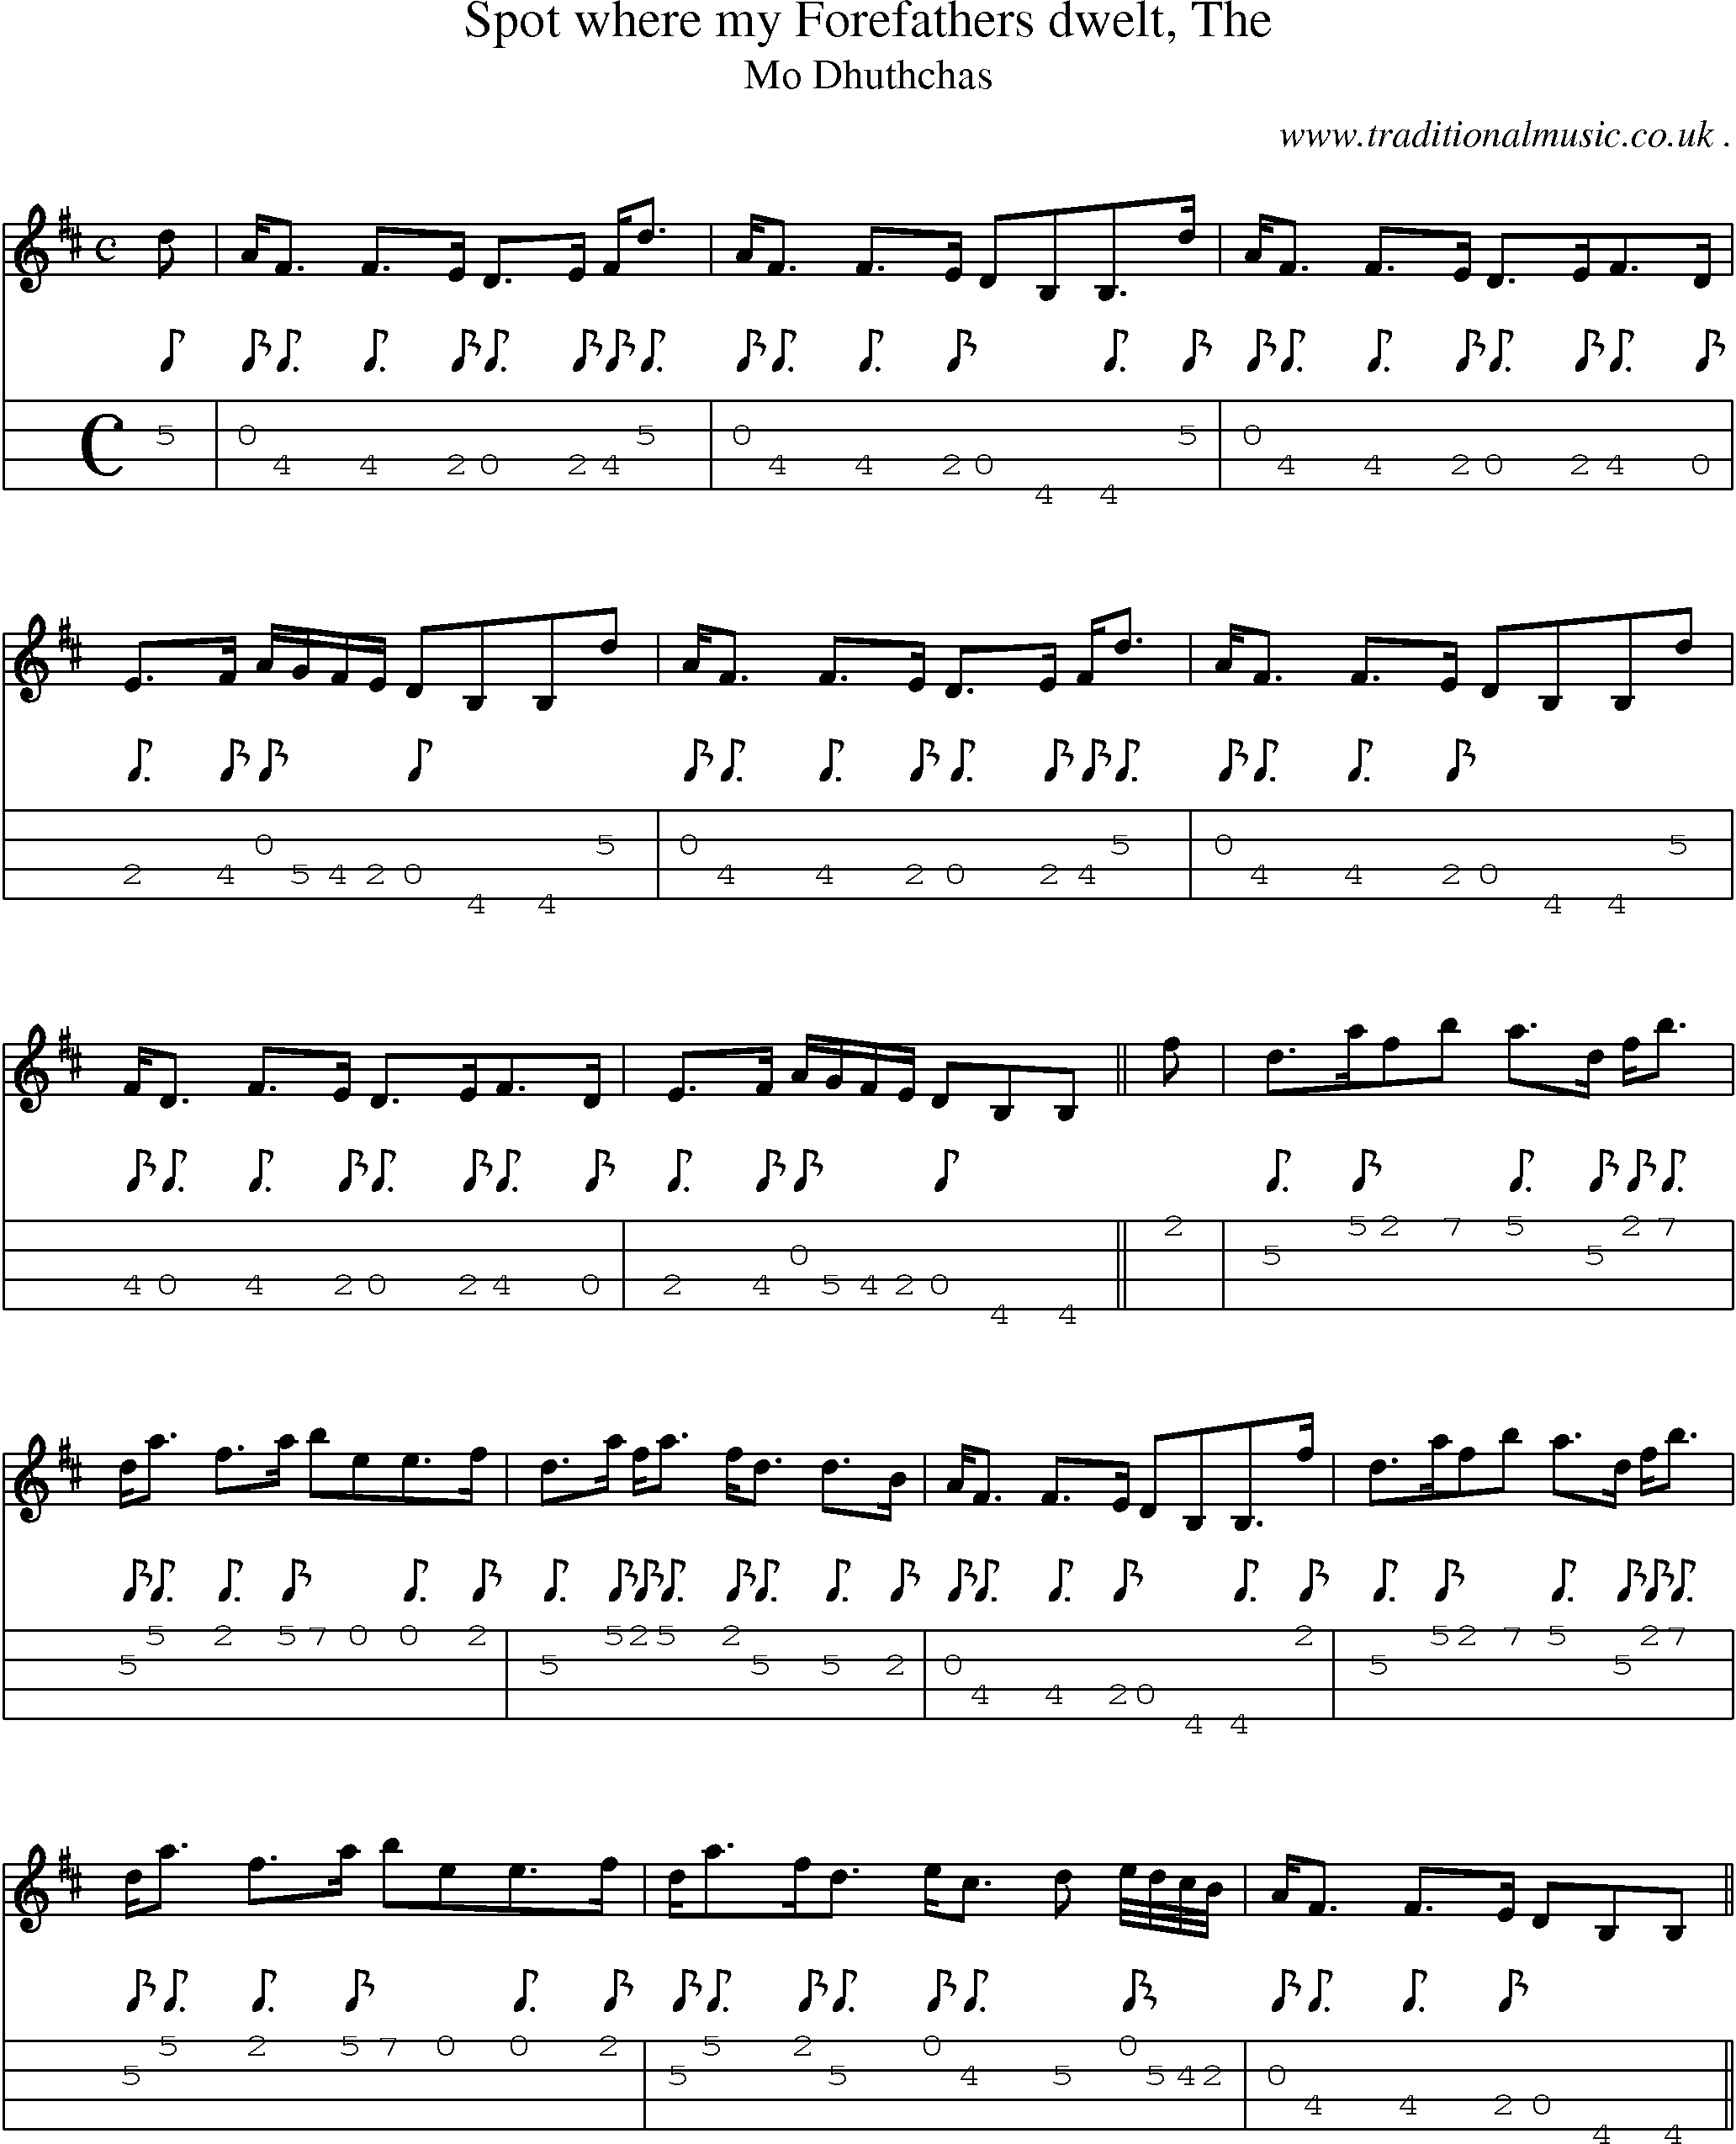 Sheet-music  score, Chords and Mandolin Tabs for Spot Where My Forefathers Dwelt The